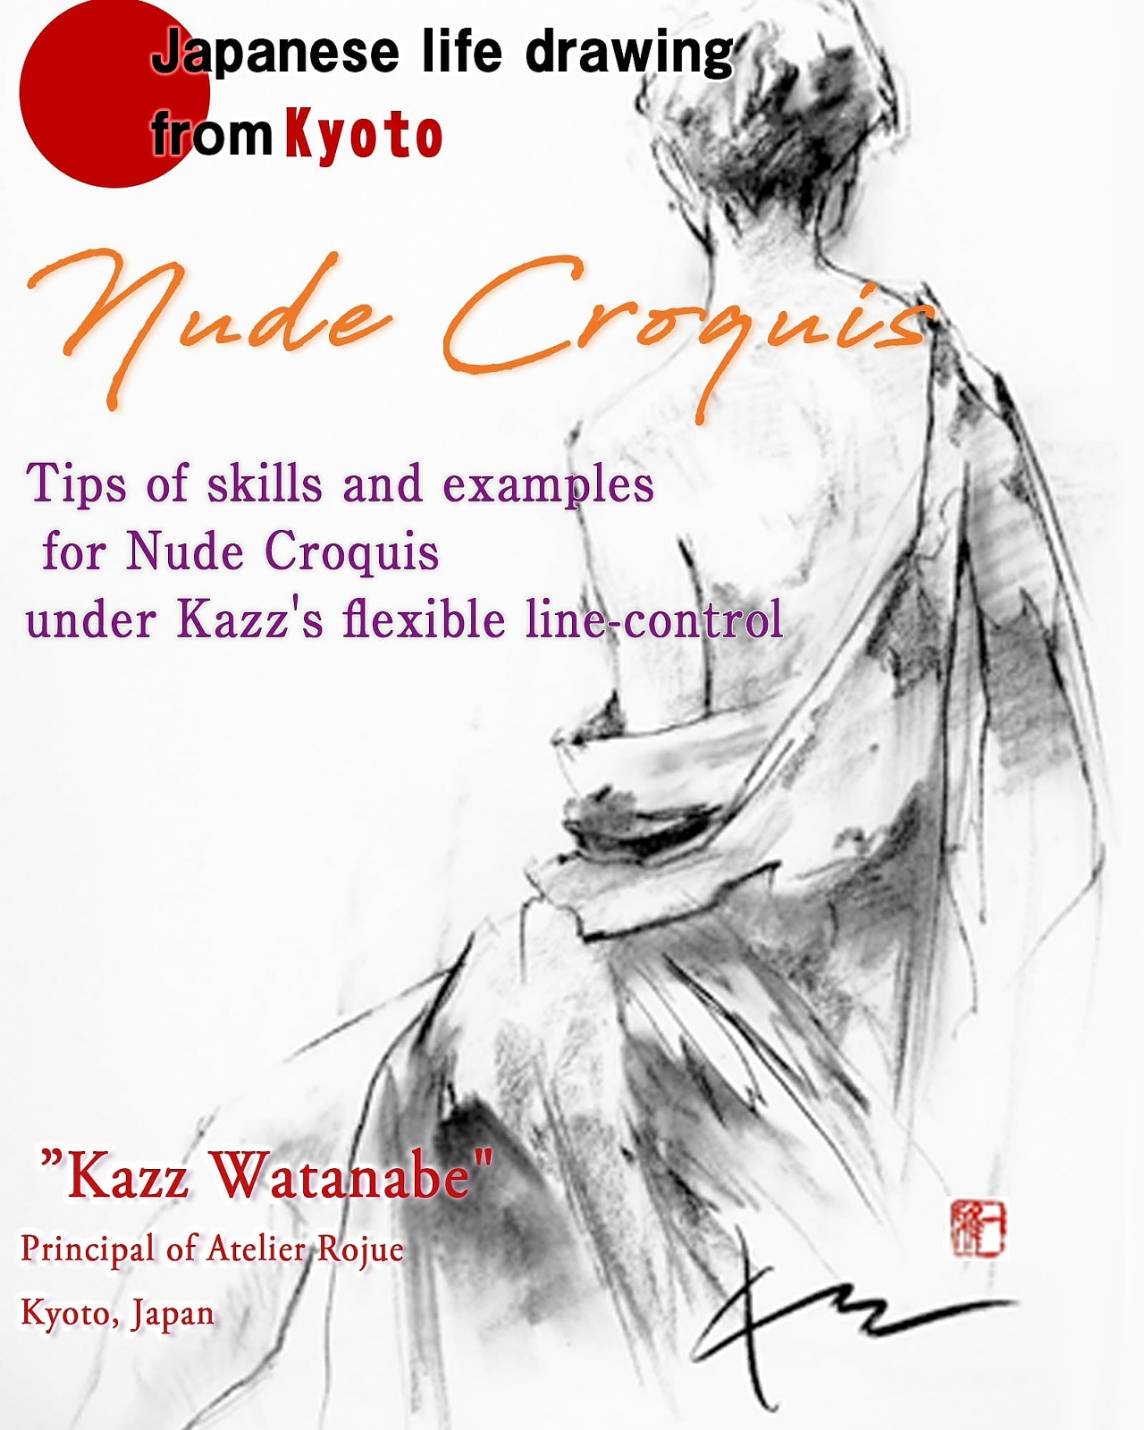 Nude Croquis Japanese life drawing from Kyoto: Tips of skils and examples for Nude Croquis under Kazz's flexible line-control 